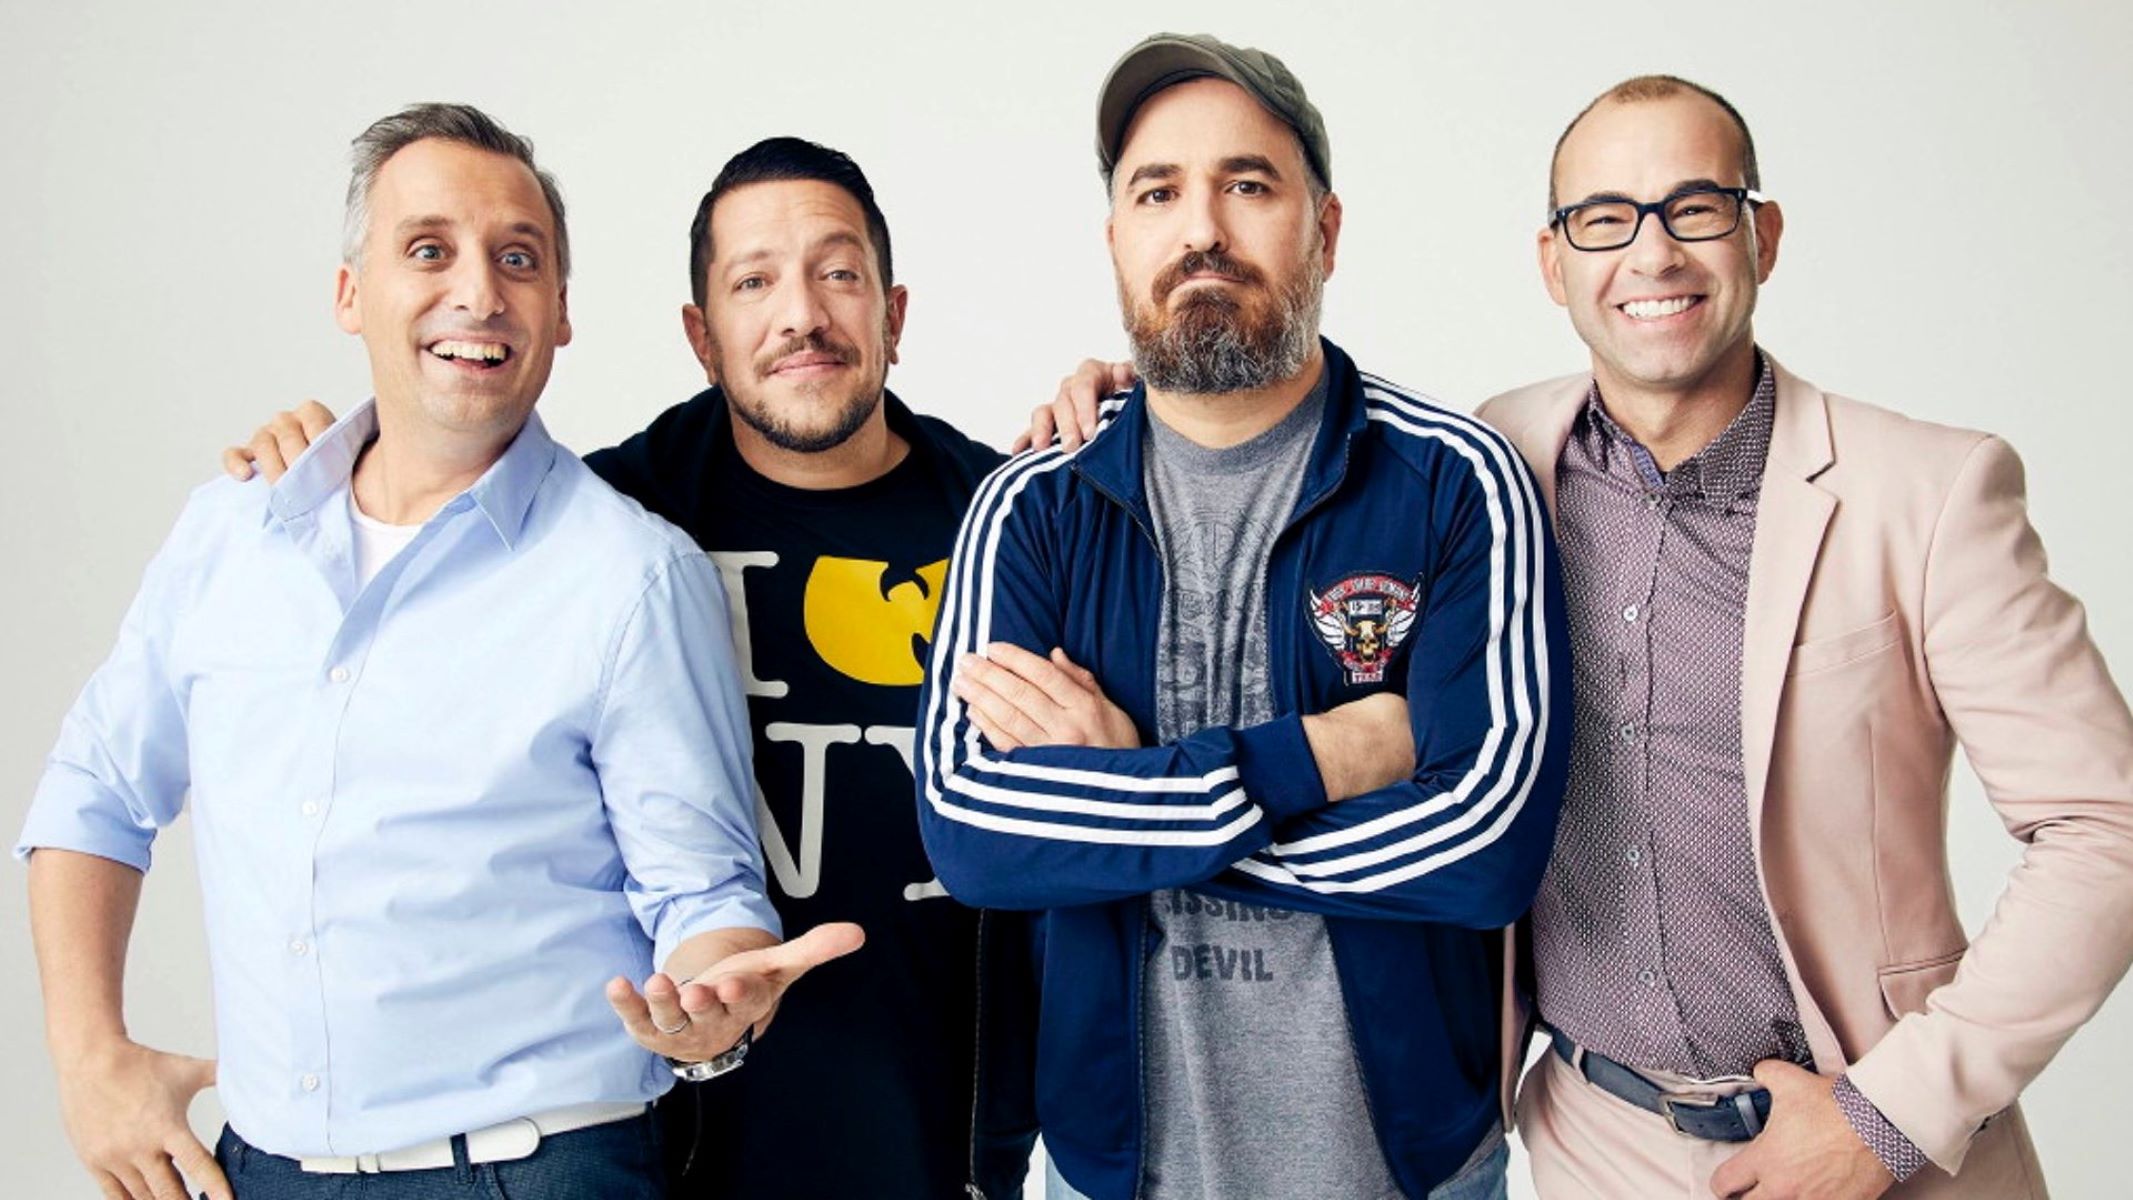 The Shocking Truth About 'Impractical Jokers' Revealed